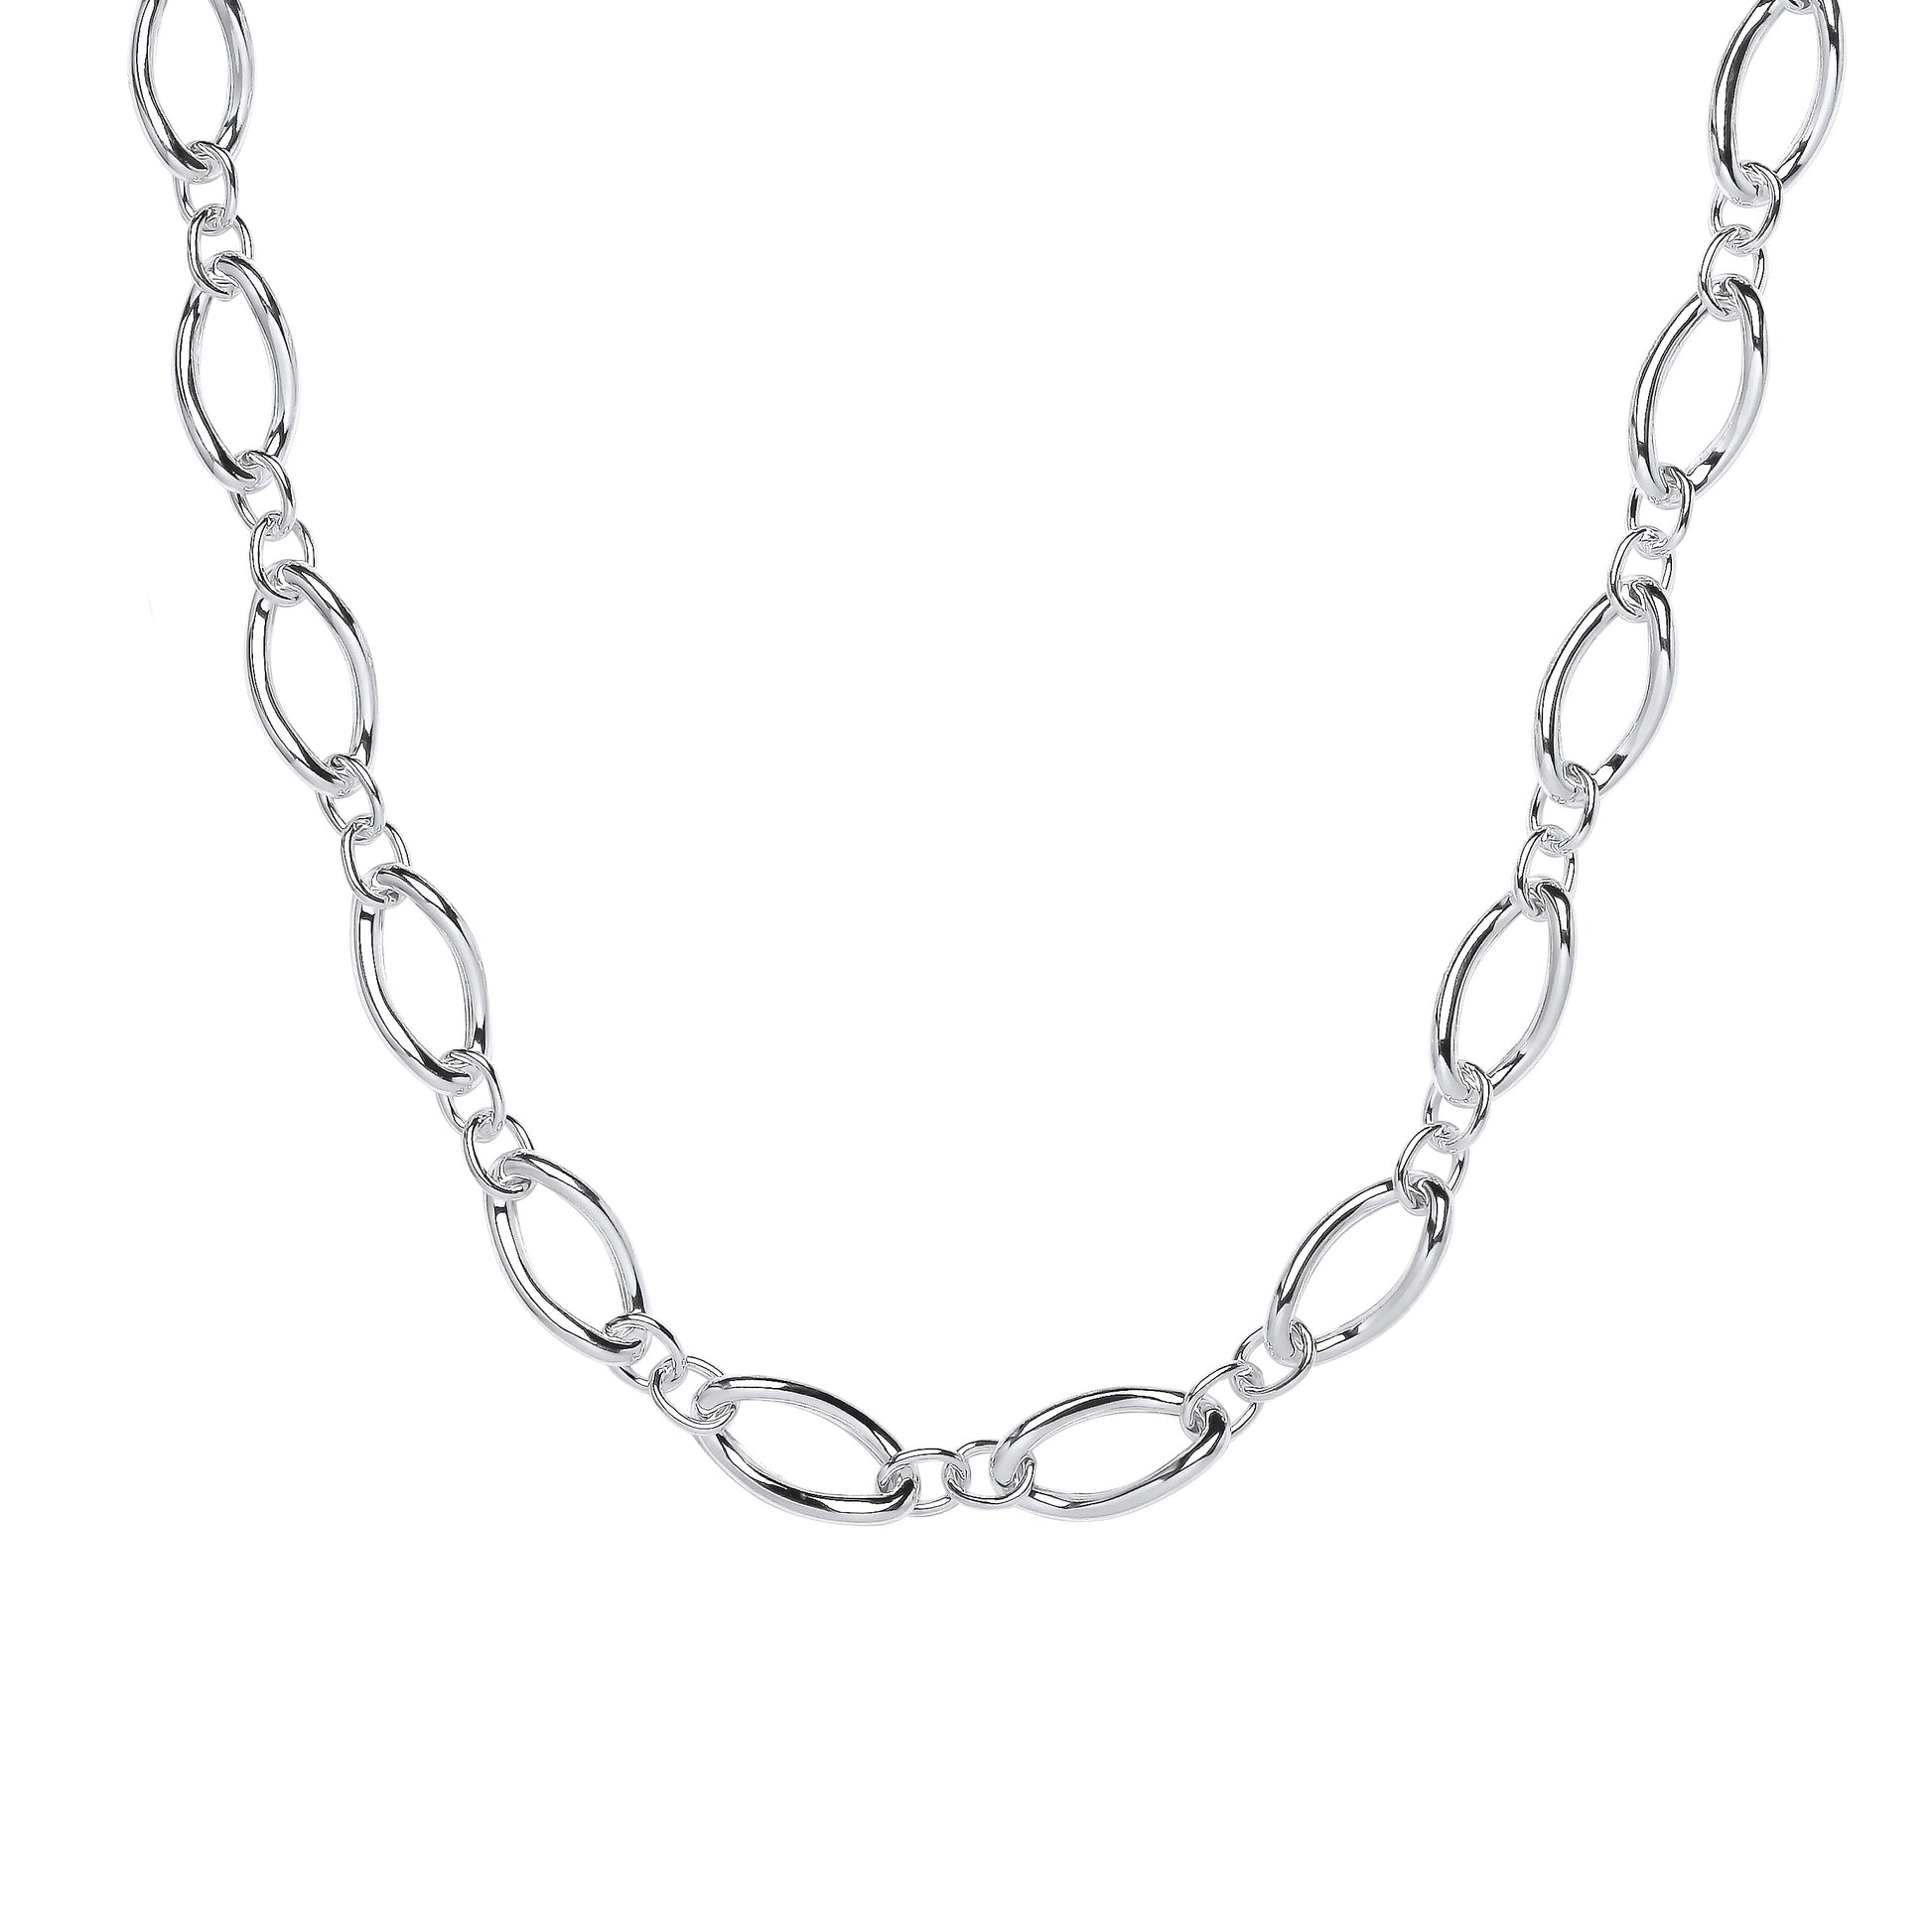 Silver  2+1 Oval Rolo Figaro Chain Necklace 18" + 2" - GVK426